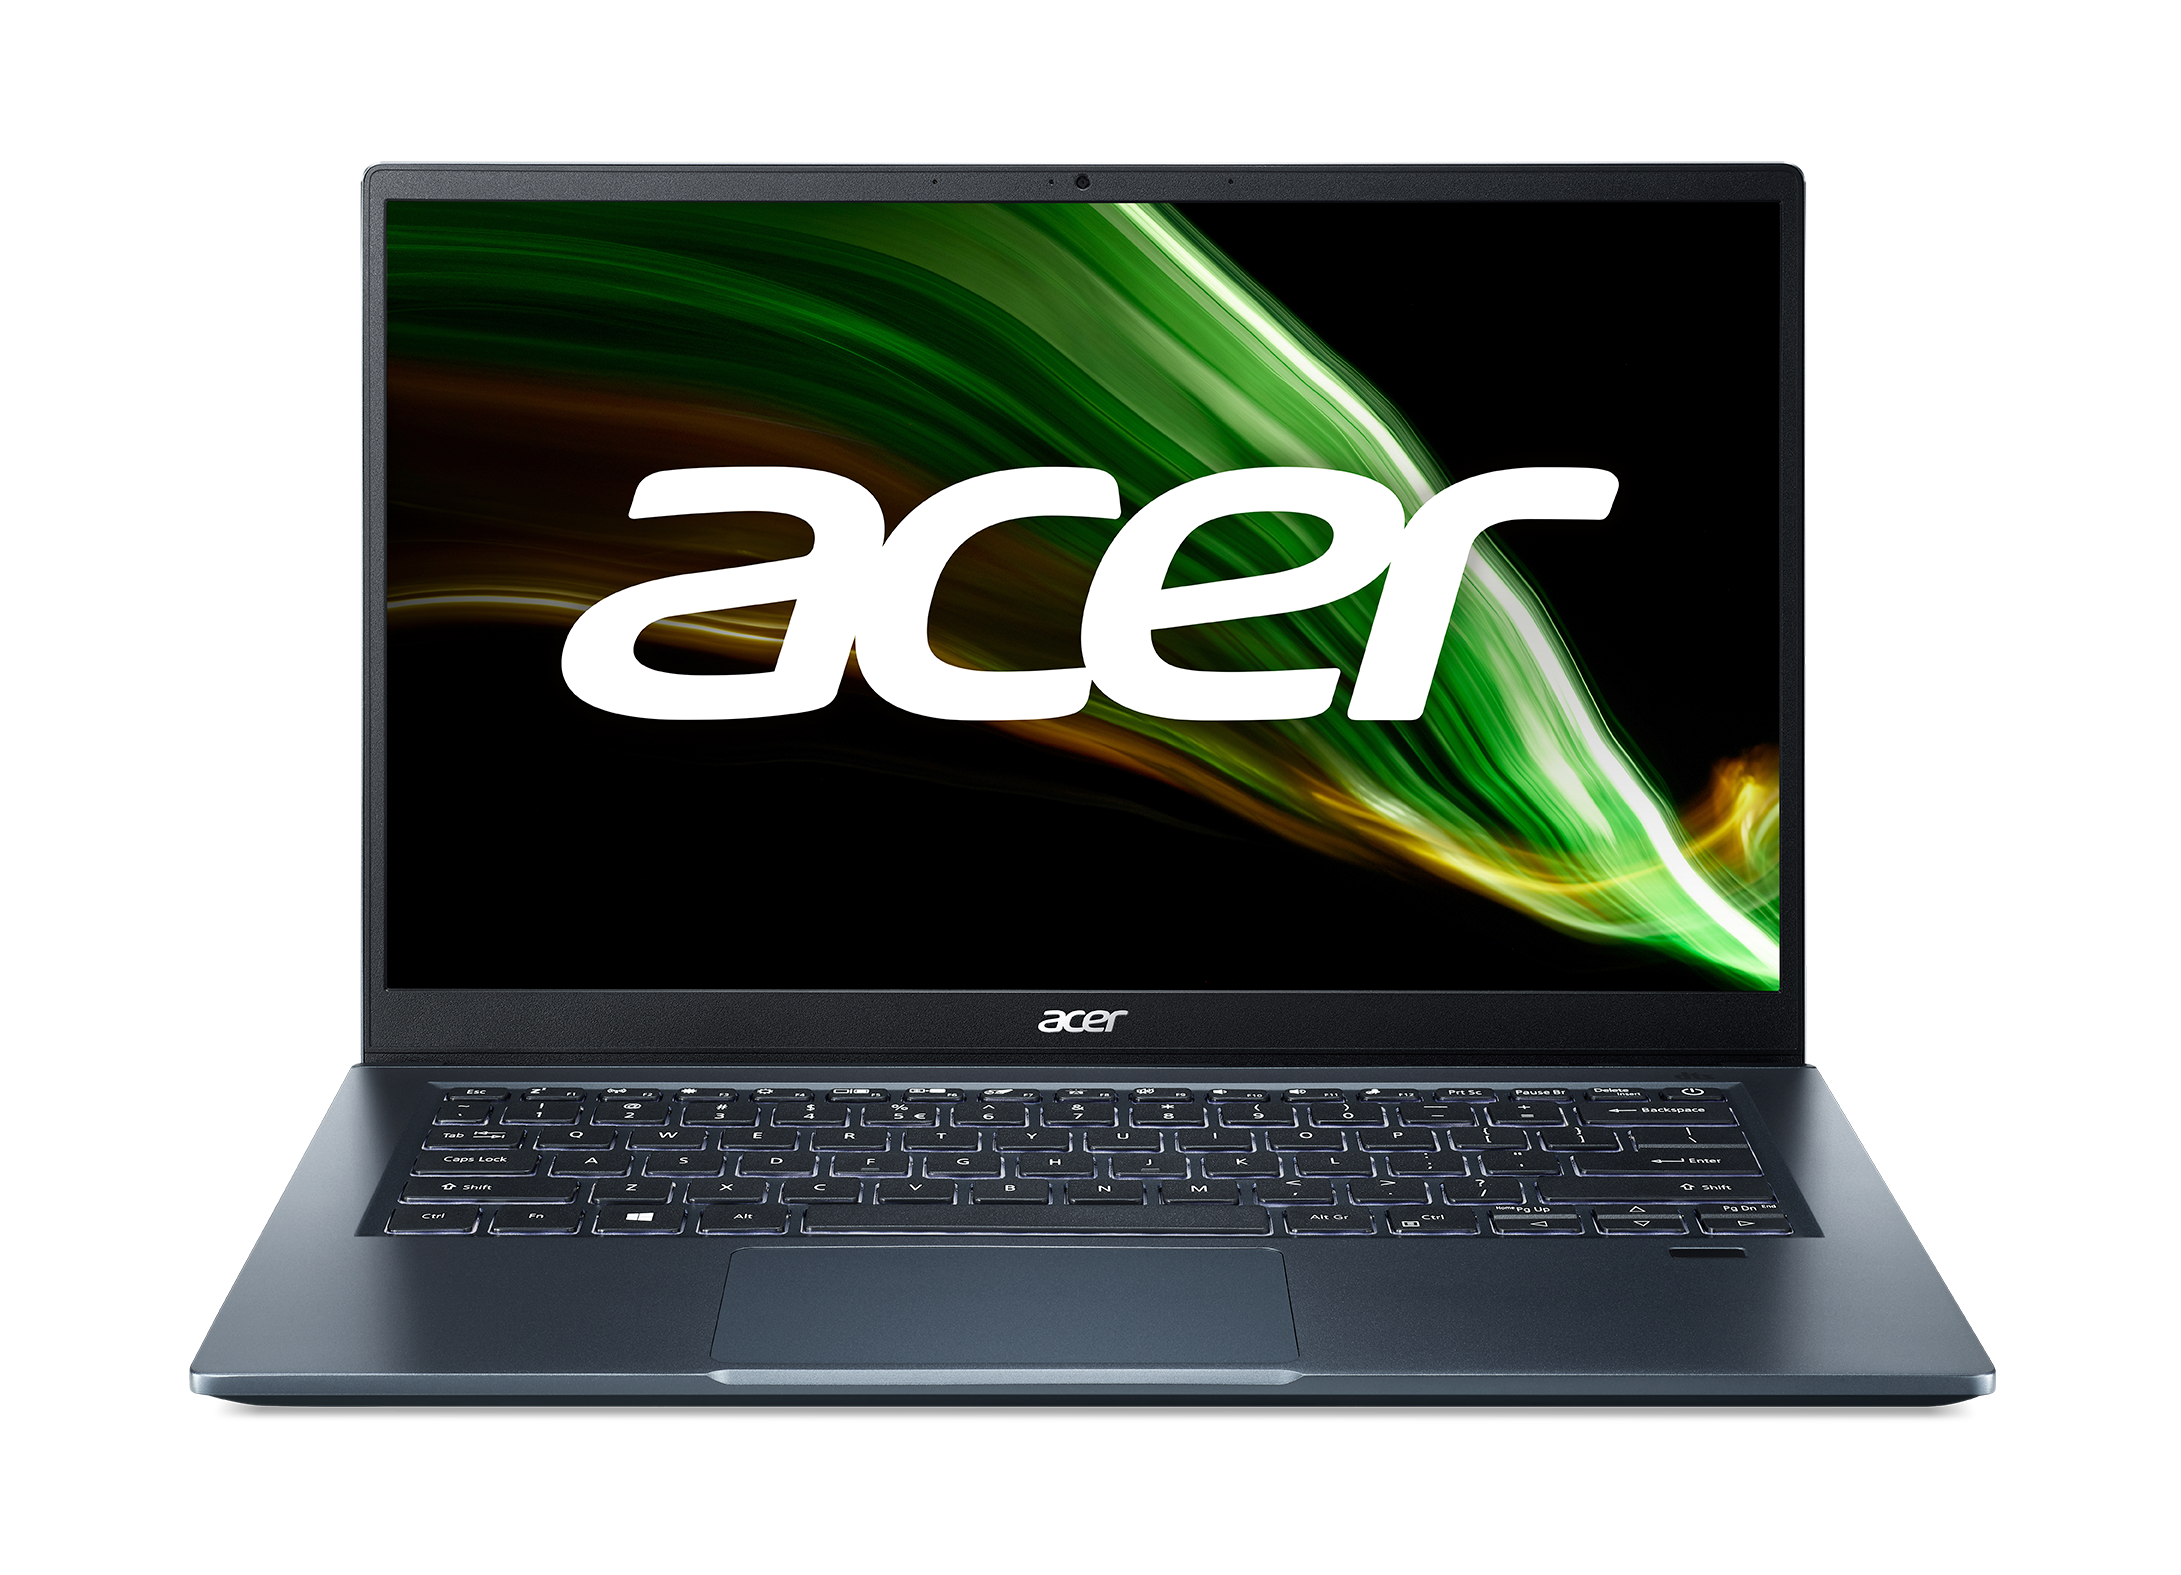 The refreshed Acer Swift 3